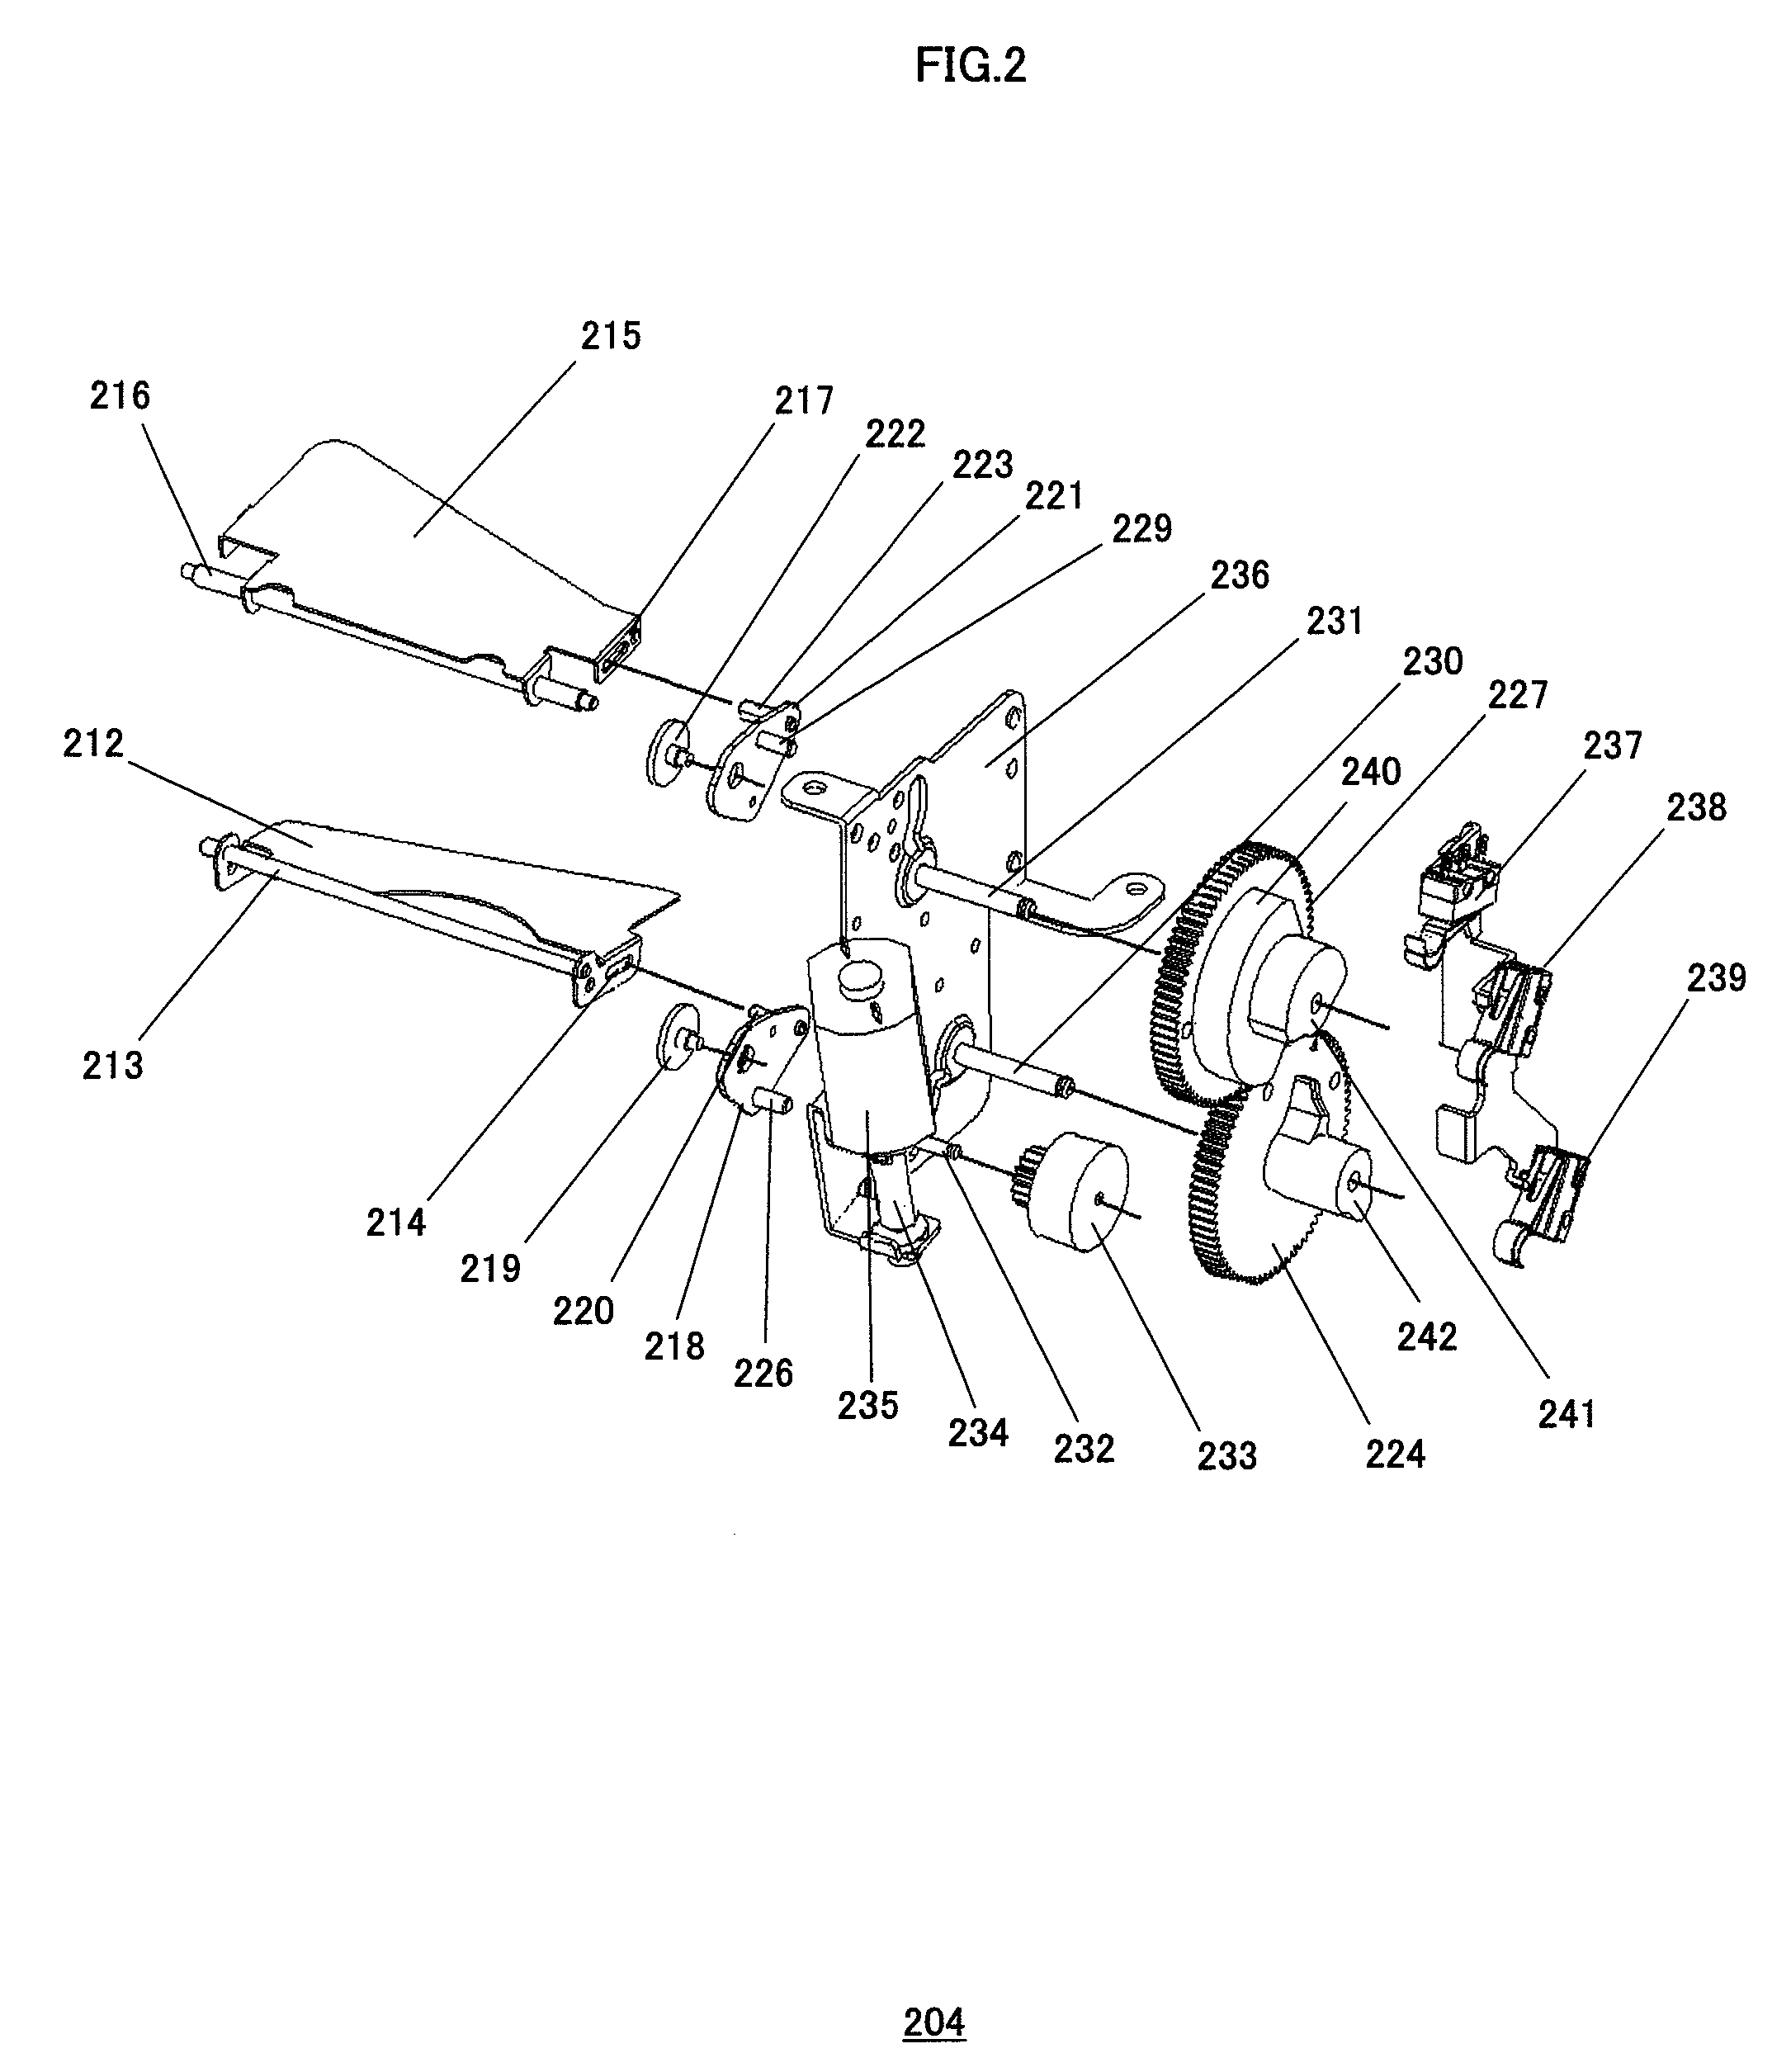 Shutter device and drive method